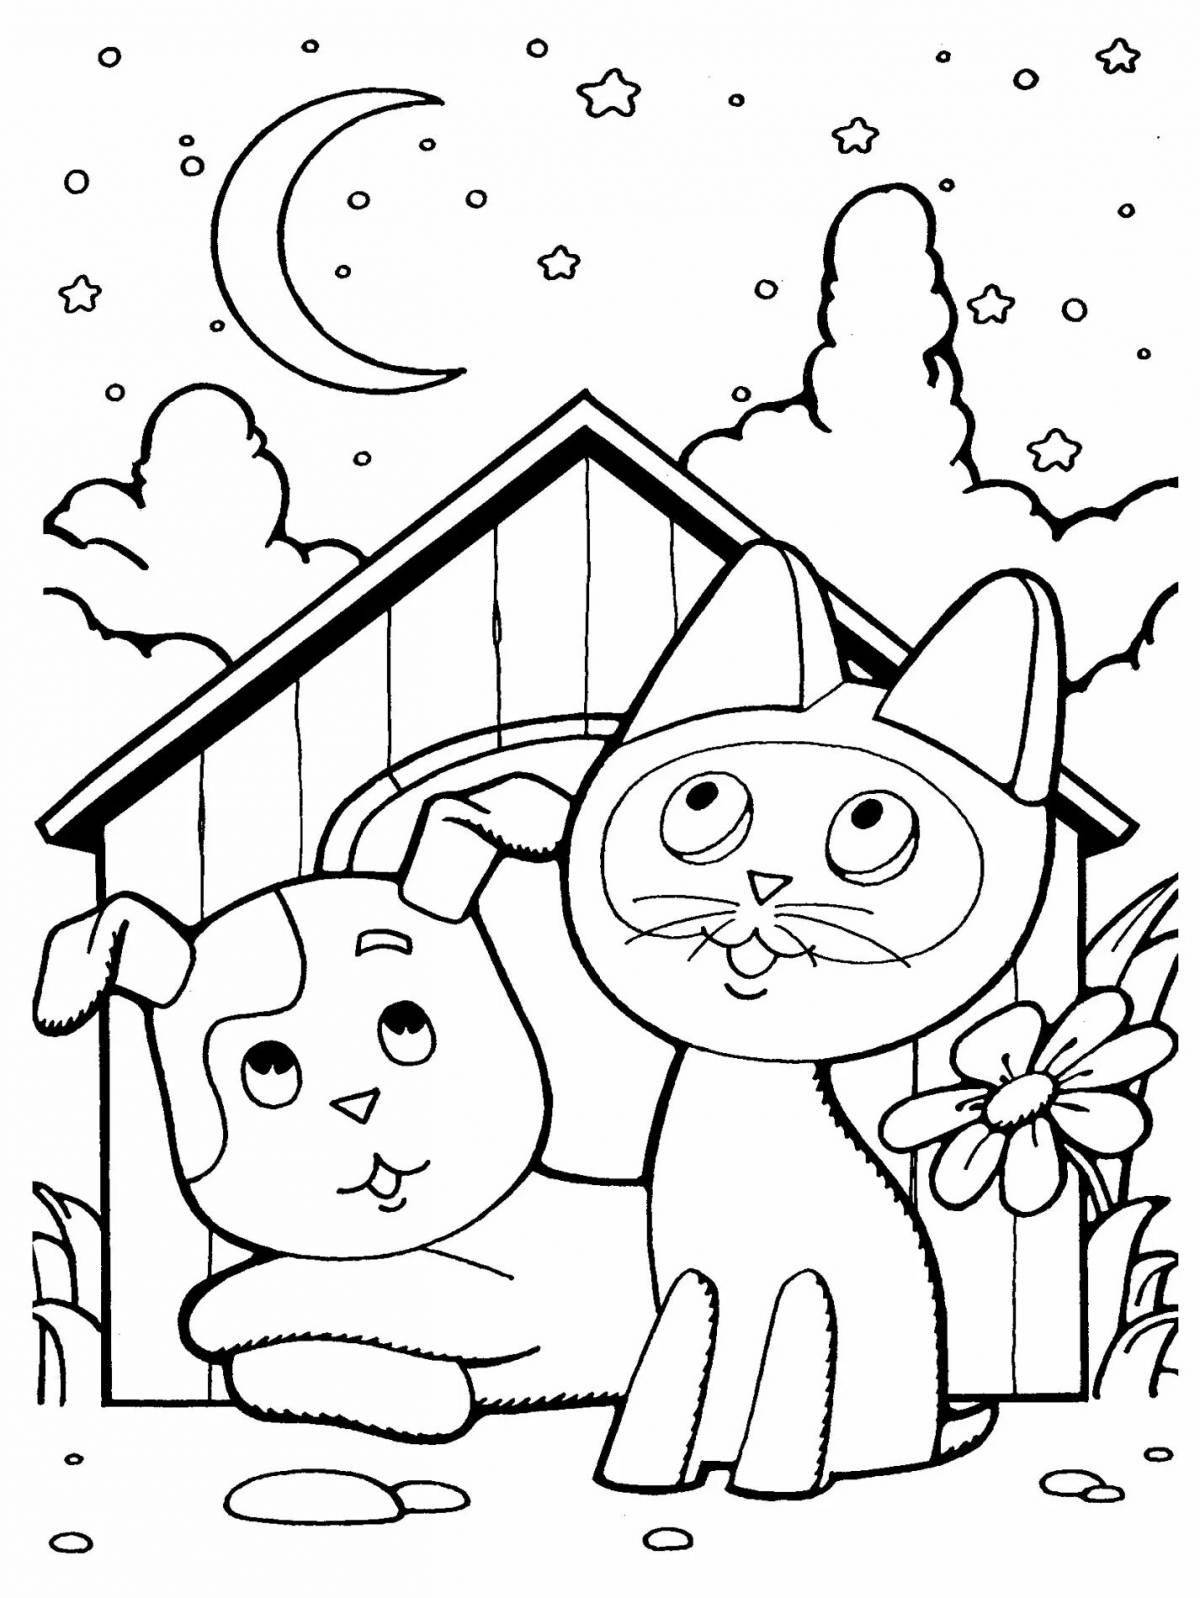 Color-effect coloring book for children from cartoons 5-6 years old